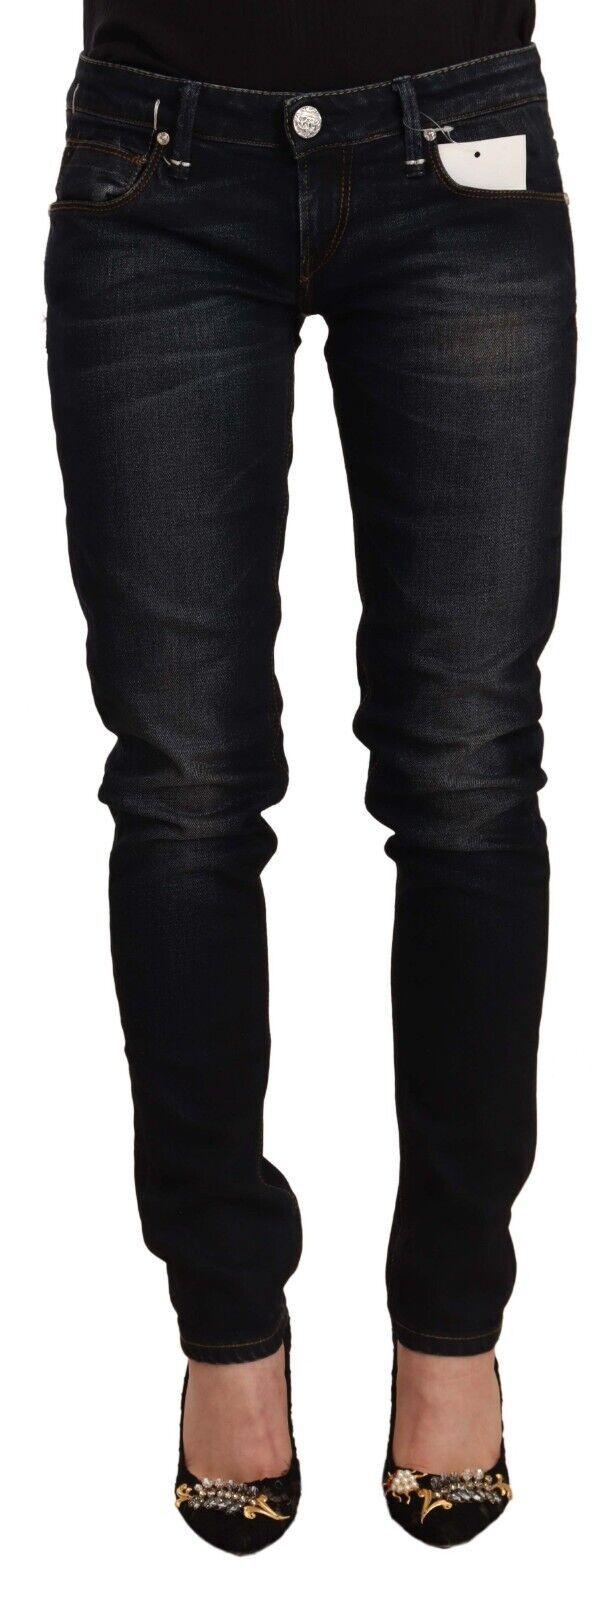 Acht Chic Black Washed Skinny Jeans for Her - PER.FASHION